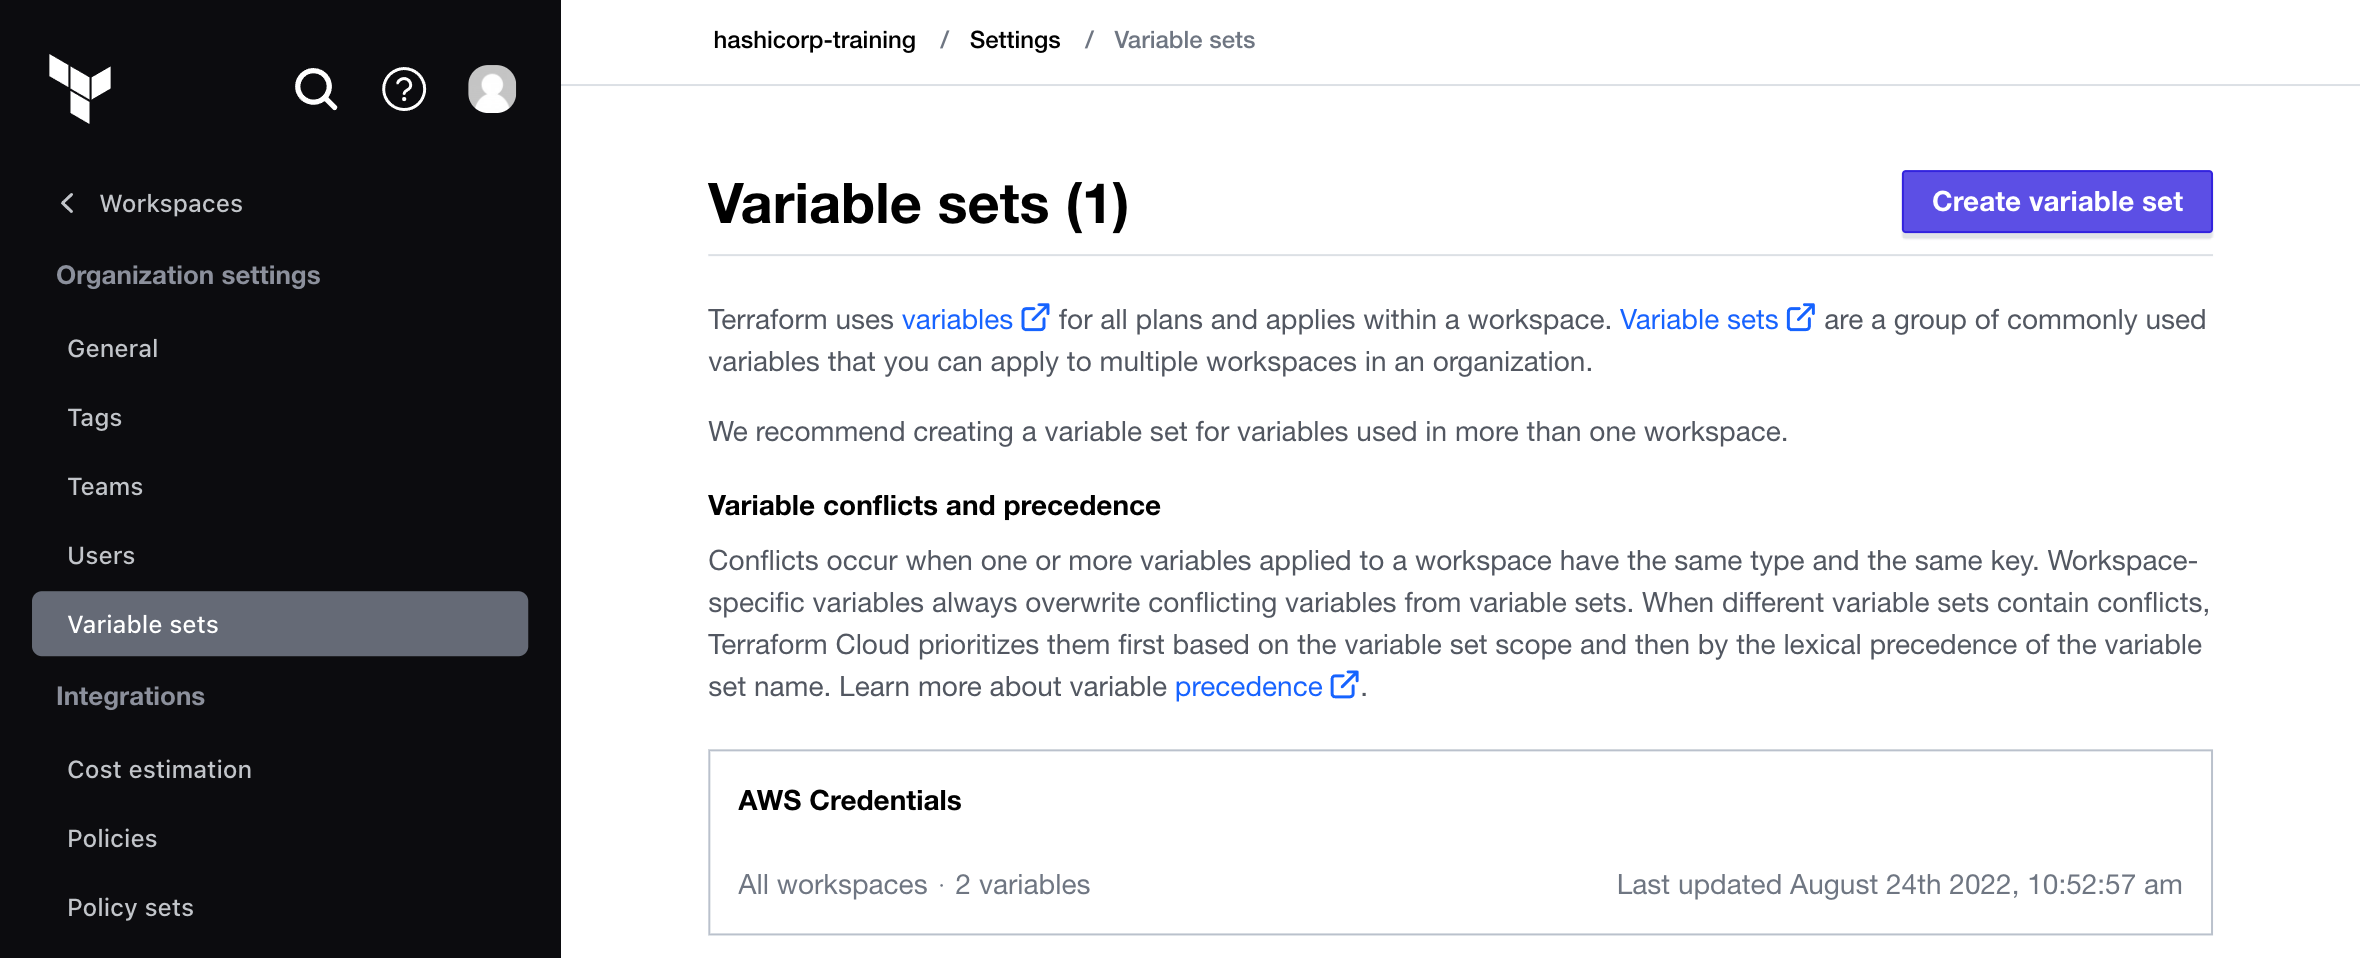 AWS credentials variable set in variable sets list